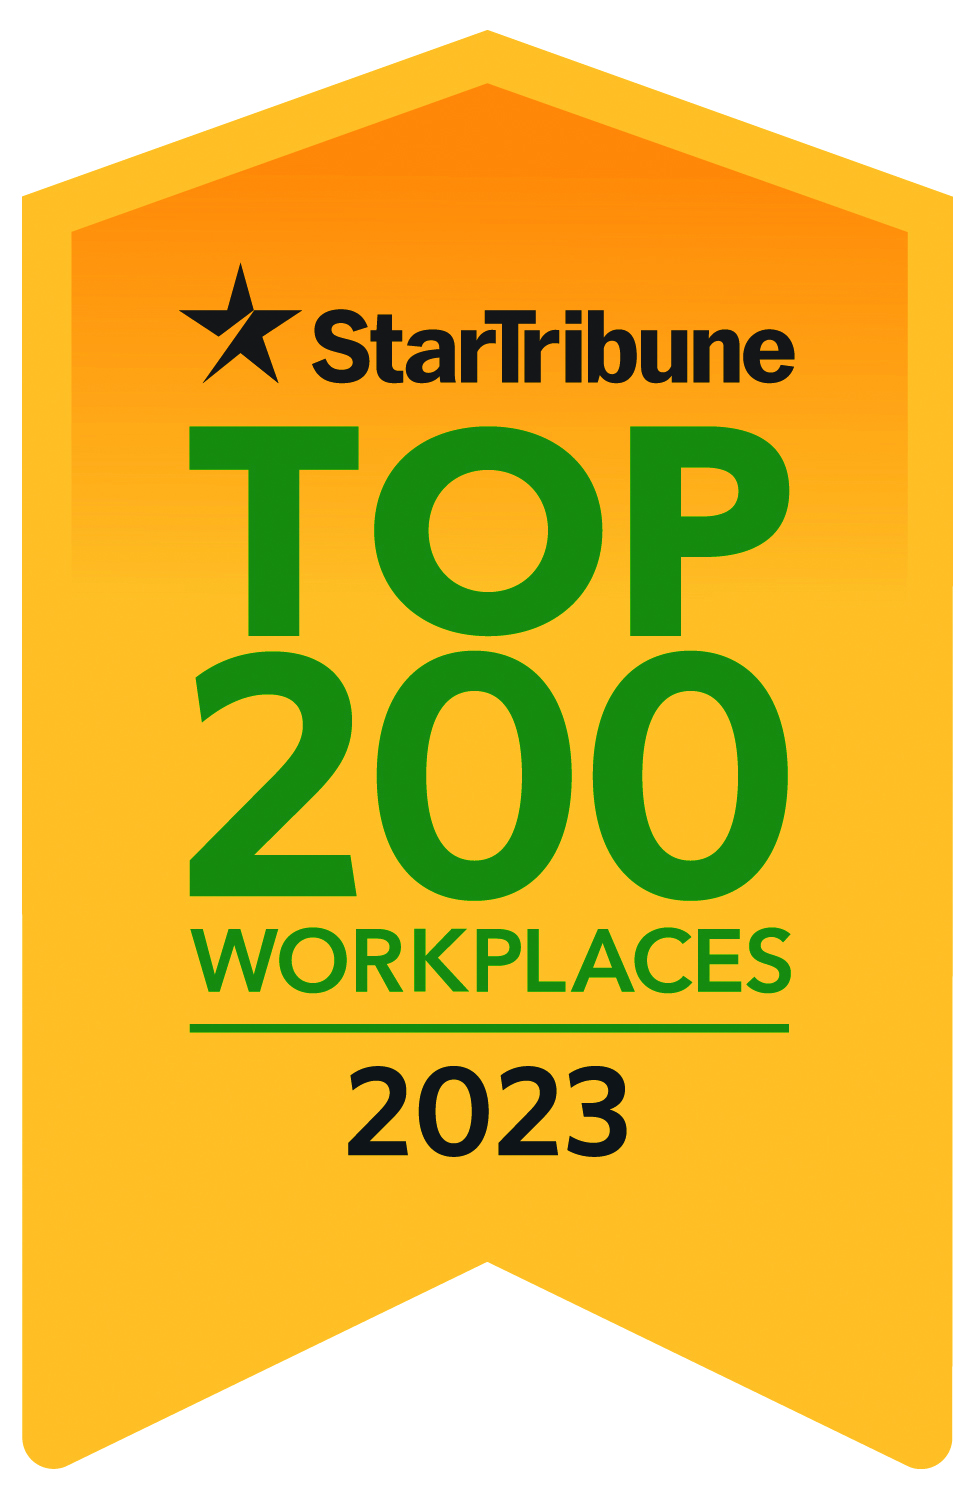 Official Top Workplace 2023 logo badge.